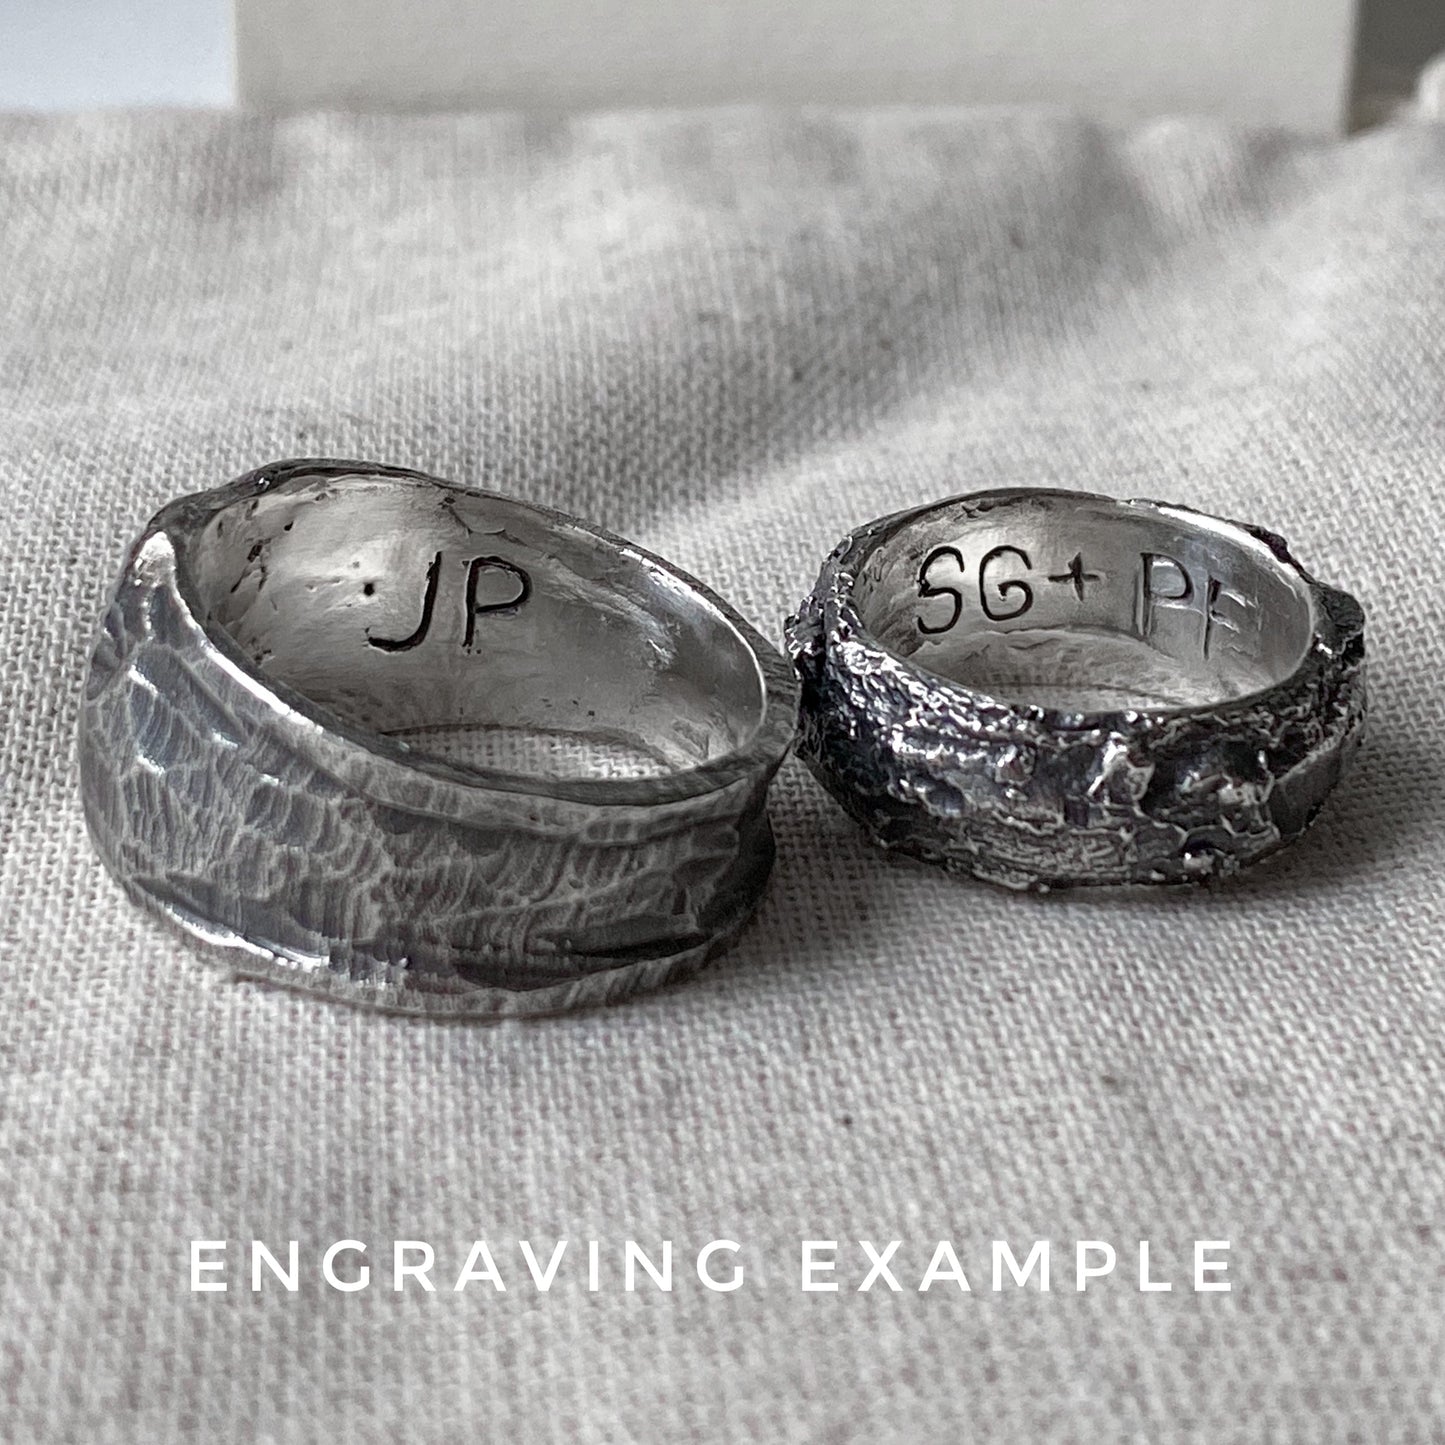 Old ring- a wide textured ring with imprint of an ancient coin Signet rings Project50g 